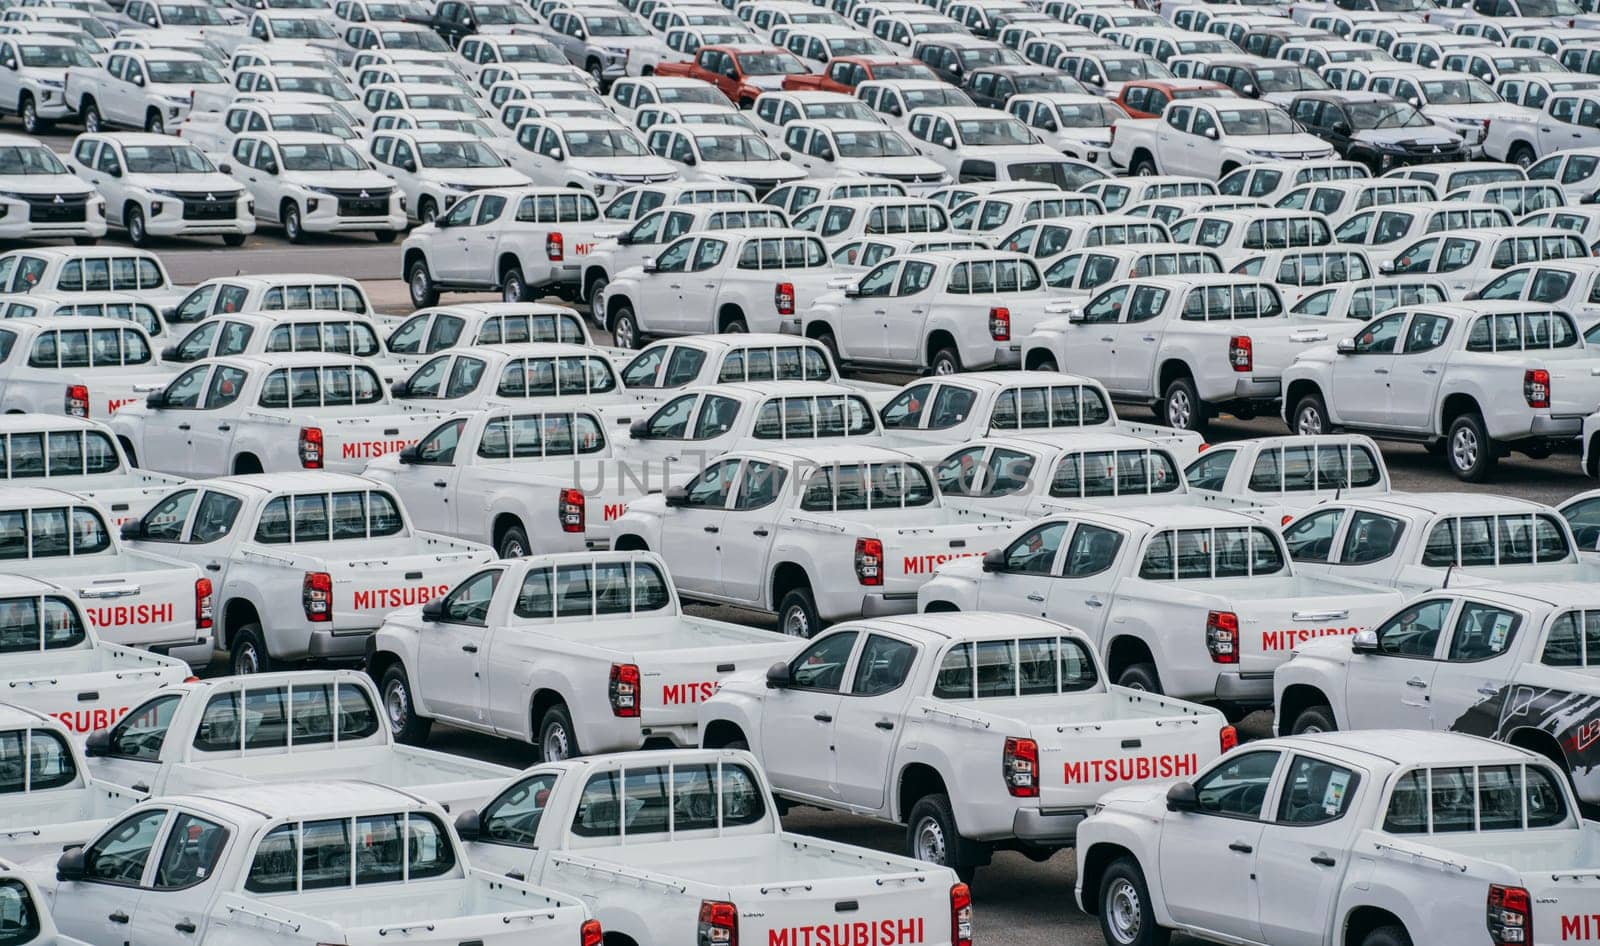 Lamchabang, Thailand - July 02, 2023 distribution center at car factory on a cloudy day, new hatchbacks are neatly lined up. top view offers a glimpse of the bustling parkinga hub of modern business.